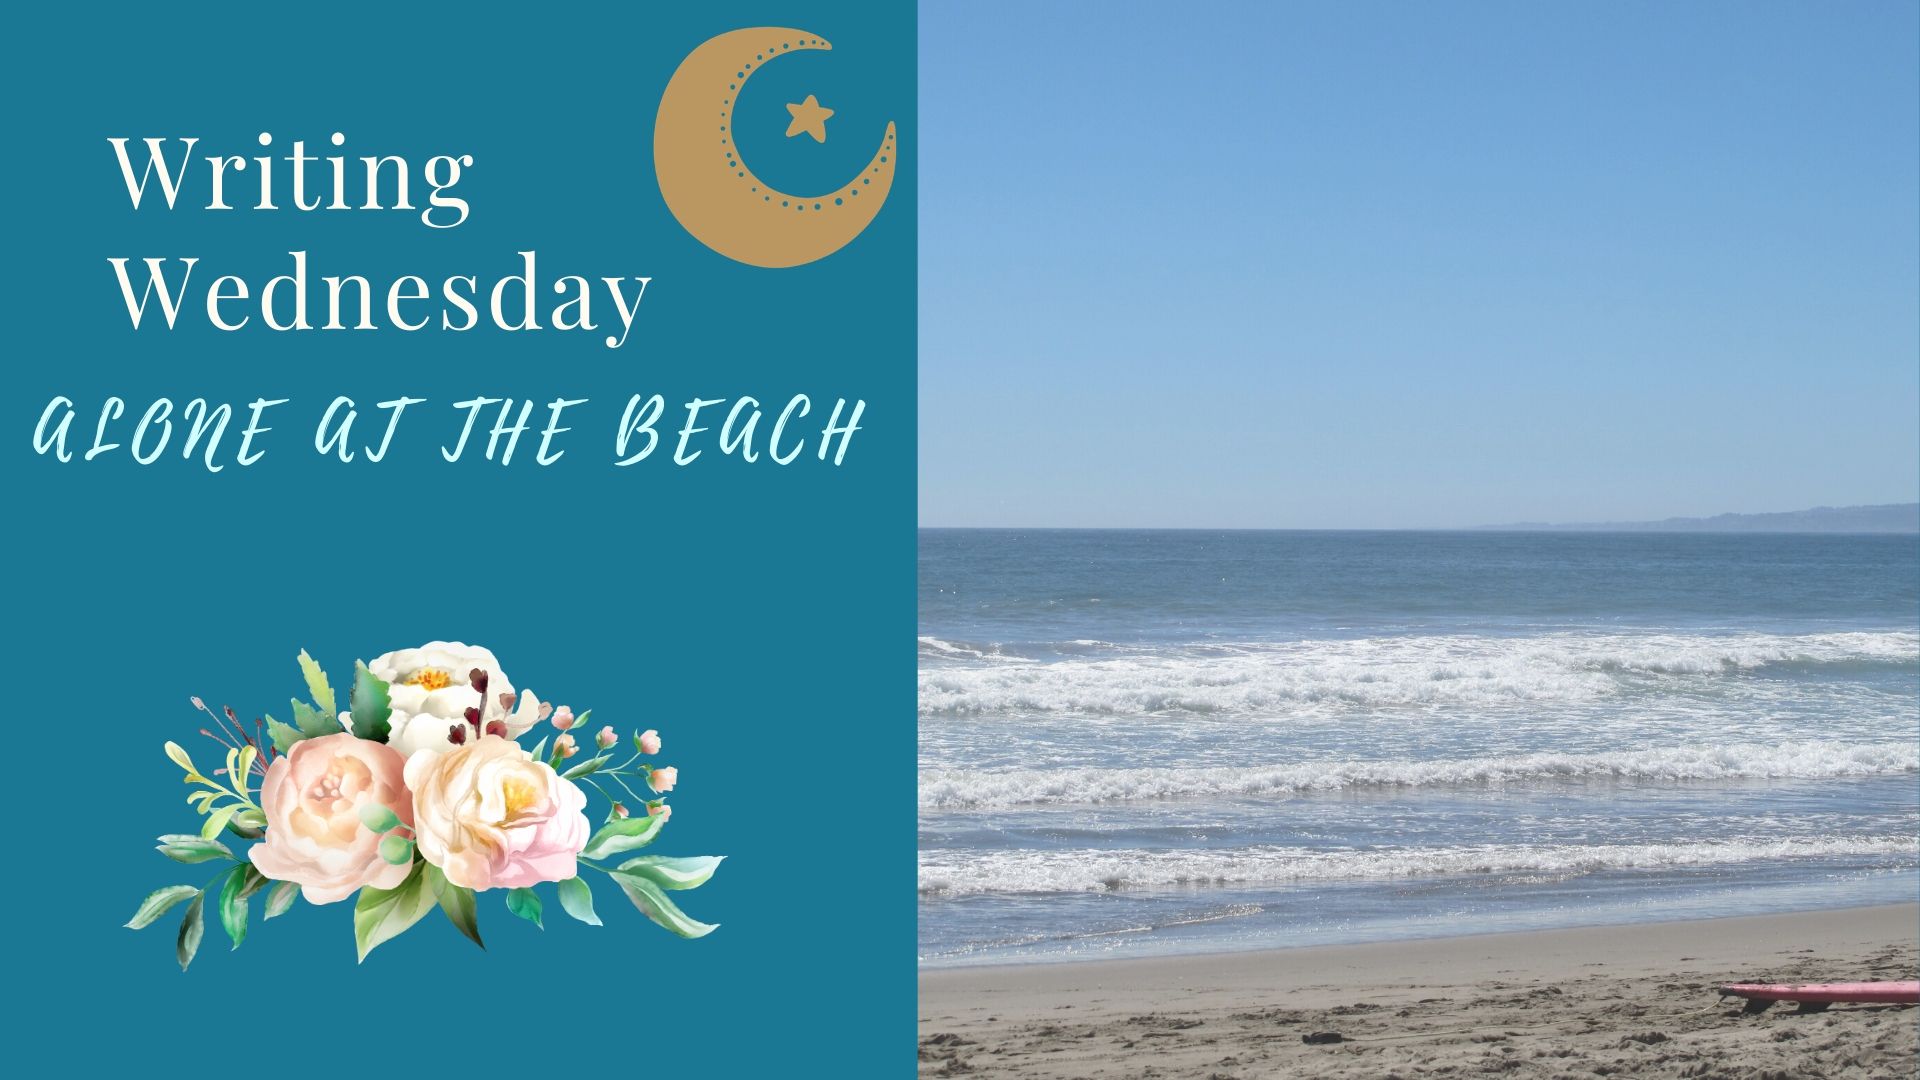 You are currently viewing Writing Wednesday: Alone at the Beach